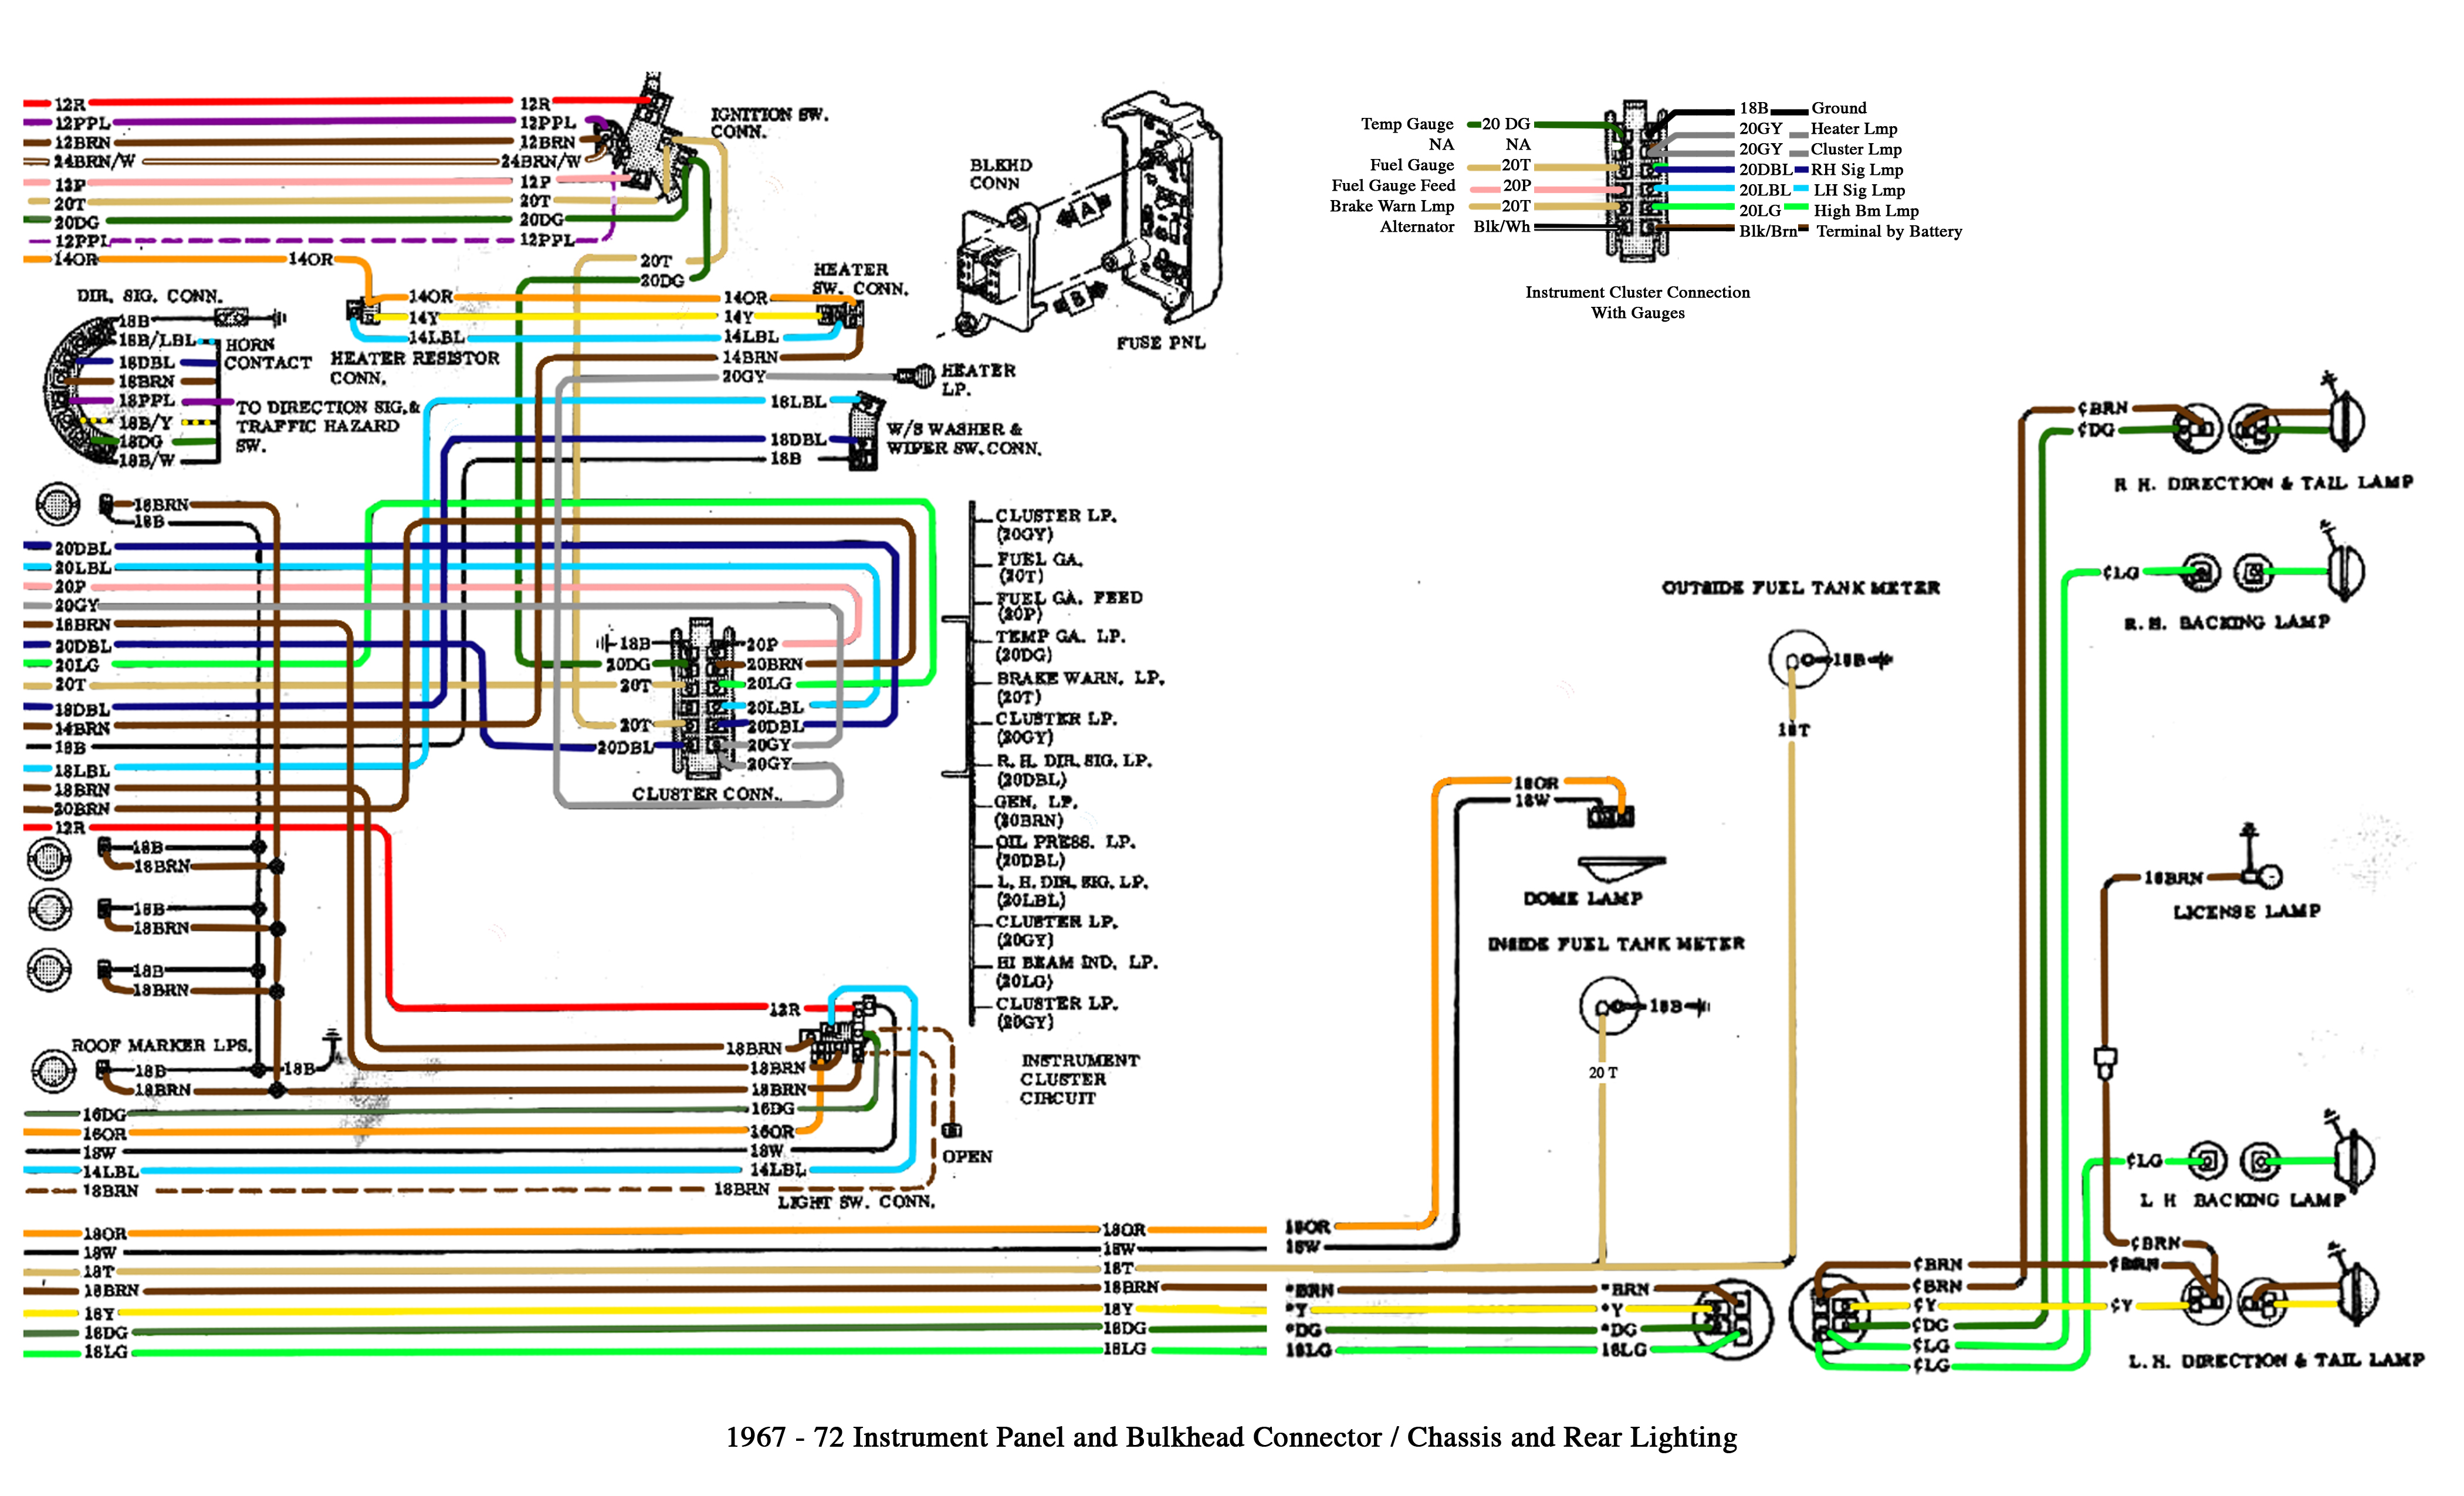 Color Wiring Diagram FINISHED - The 1947 - Present Chevrolet & GMC Truck  Message Board Network  Toyota Starlet 1987 Wiring Diagram    67-72 Chevy Trucks